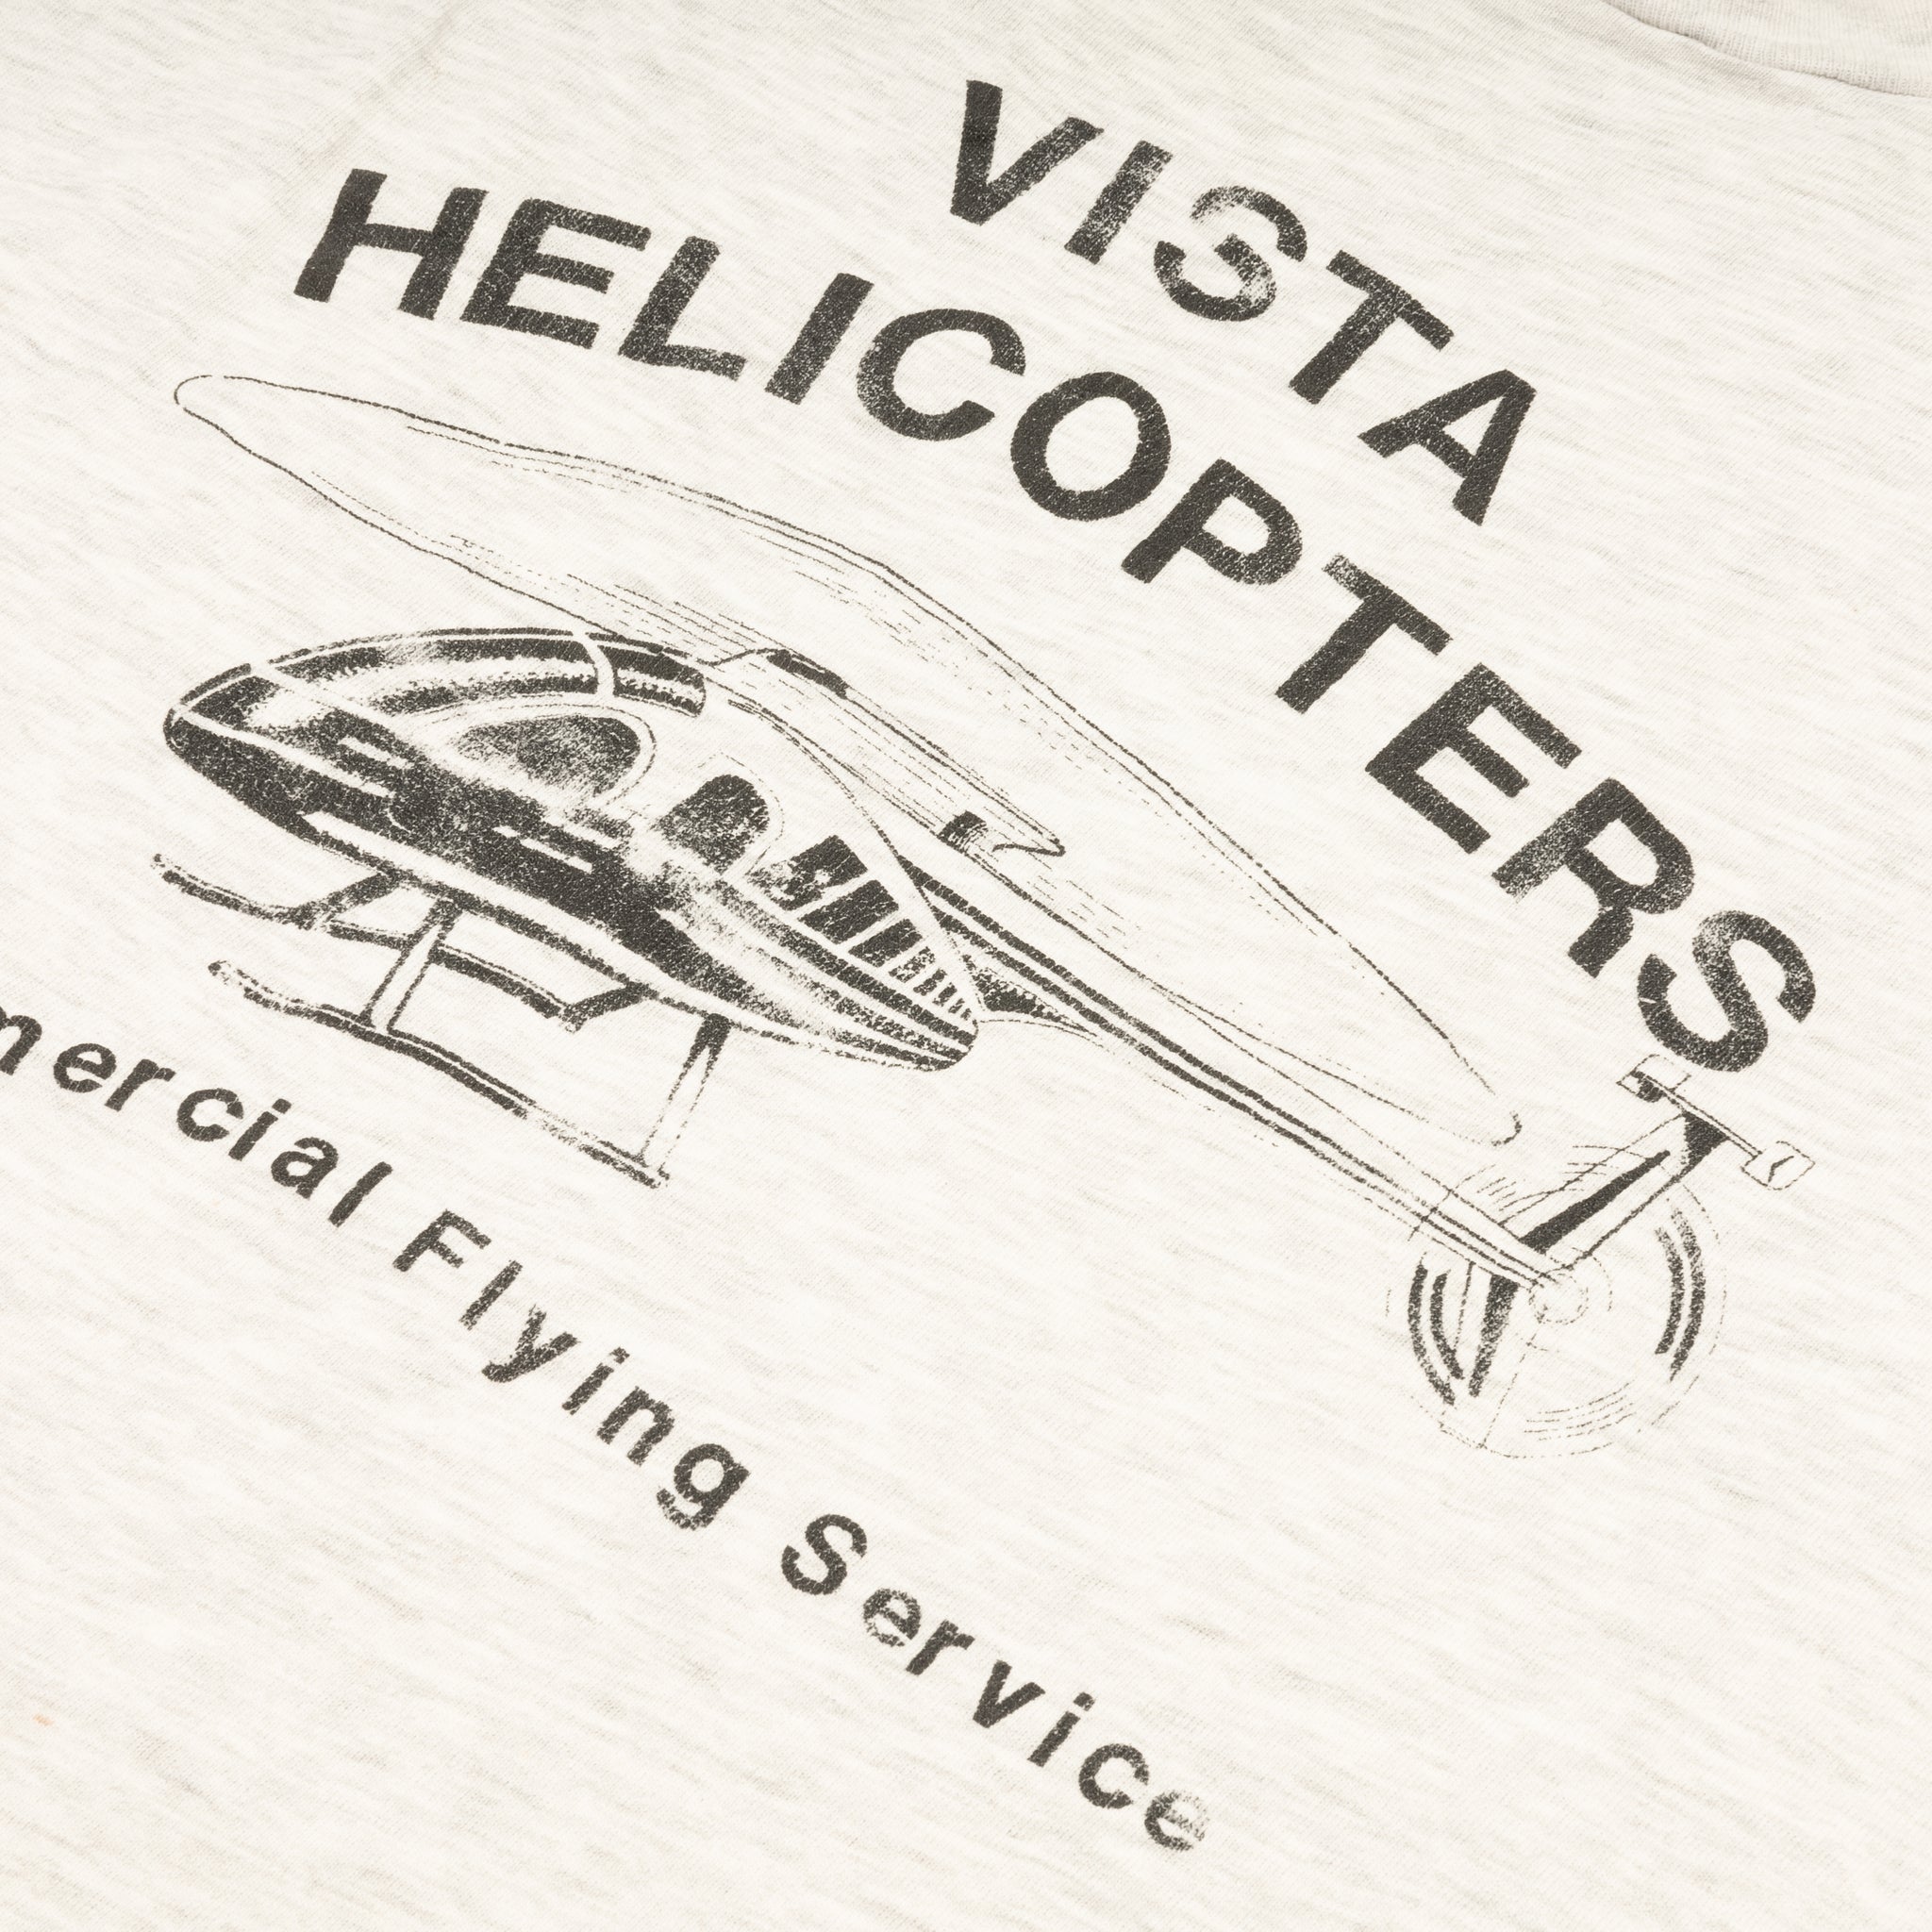 Vista Helicopters